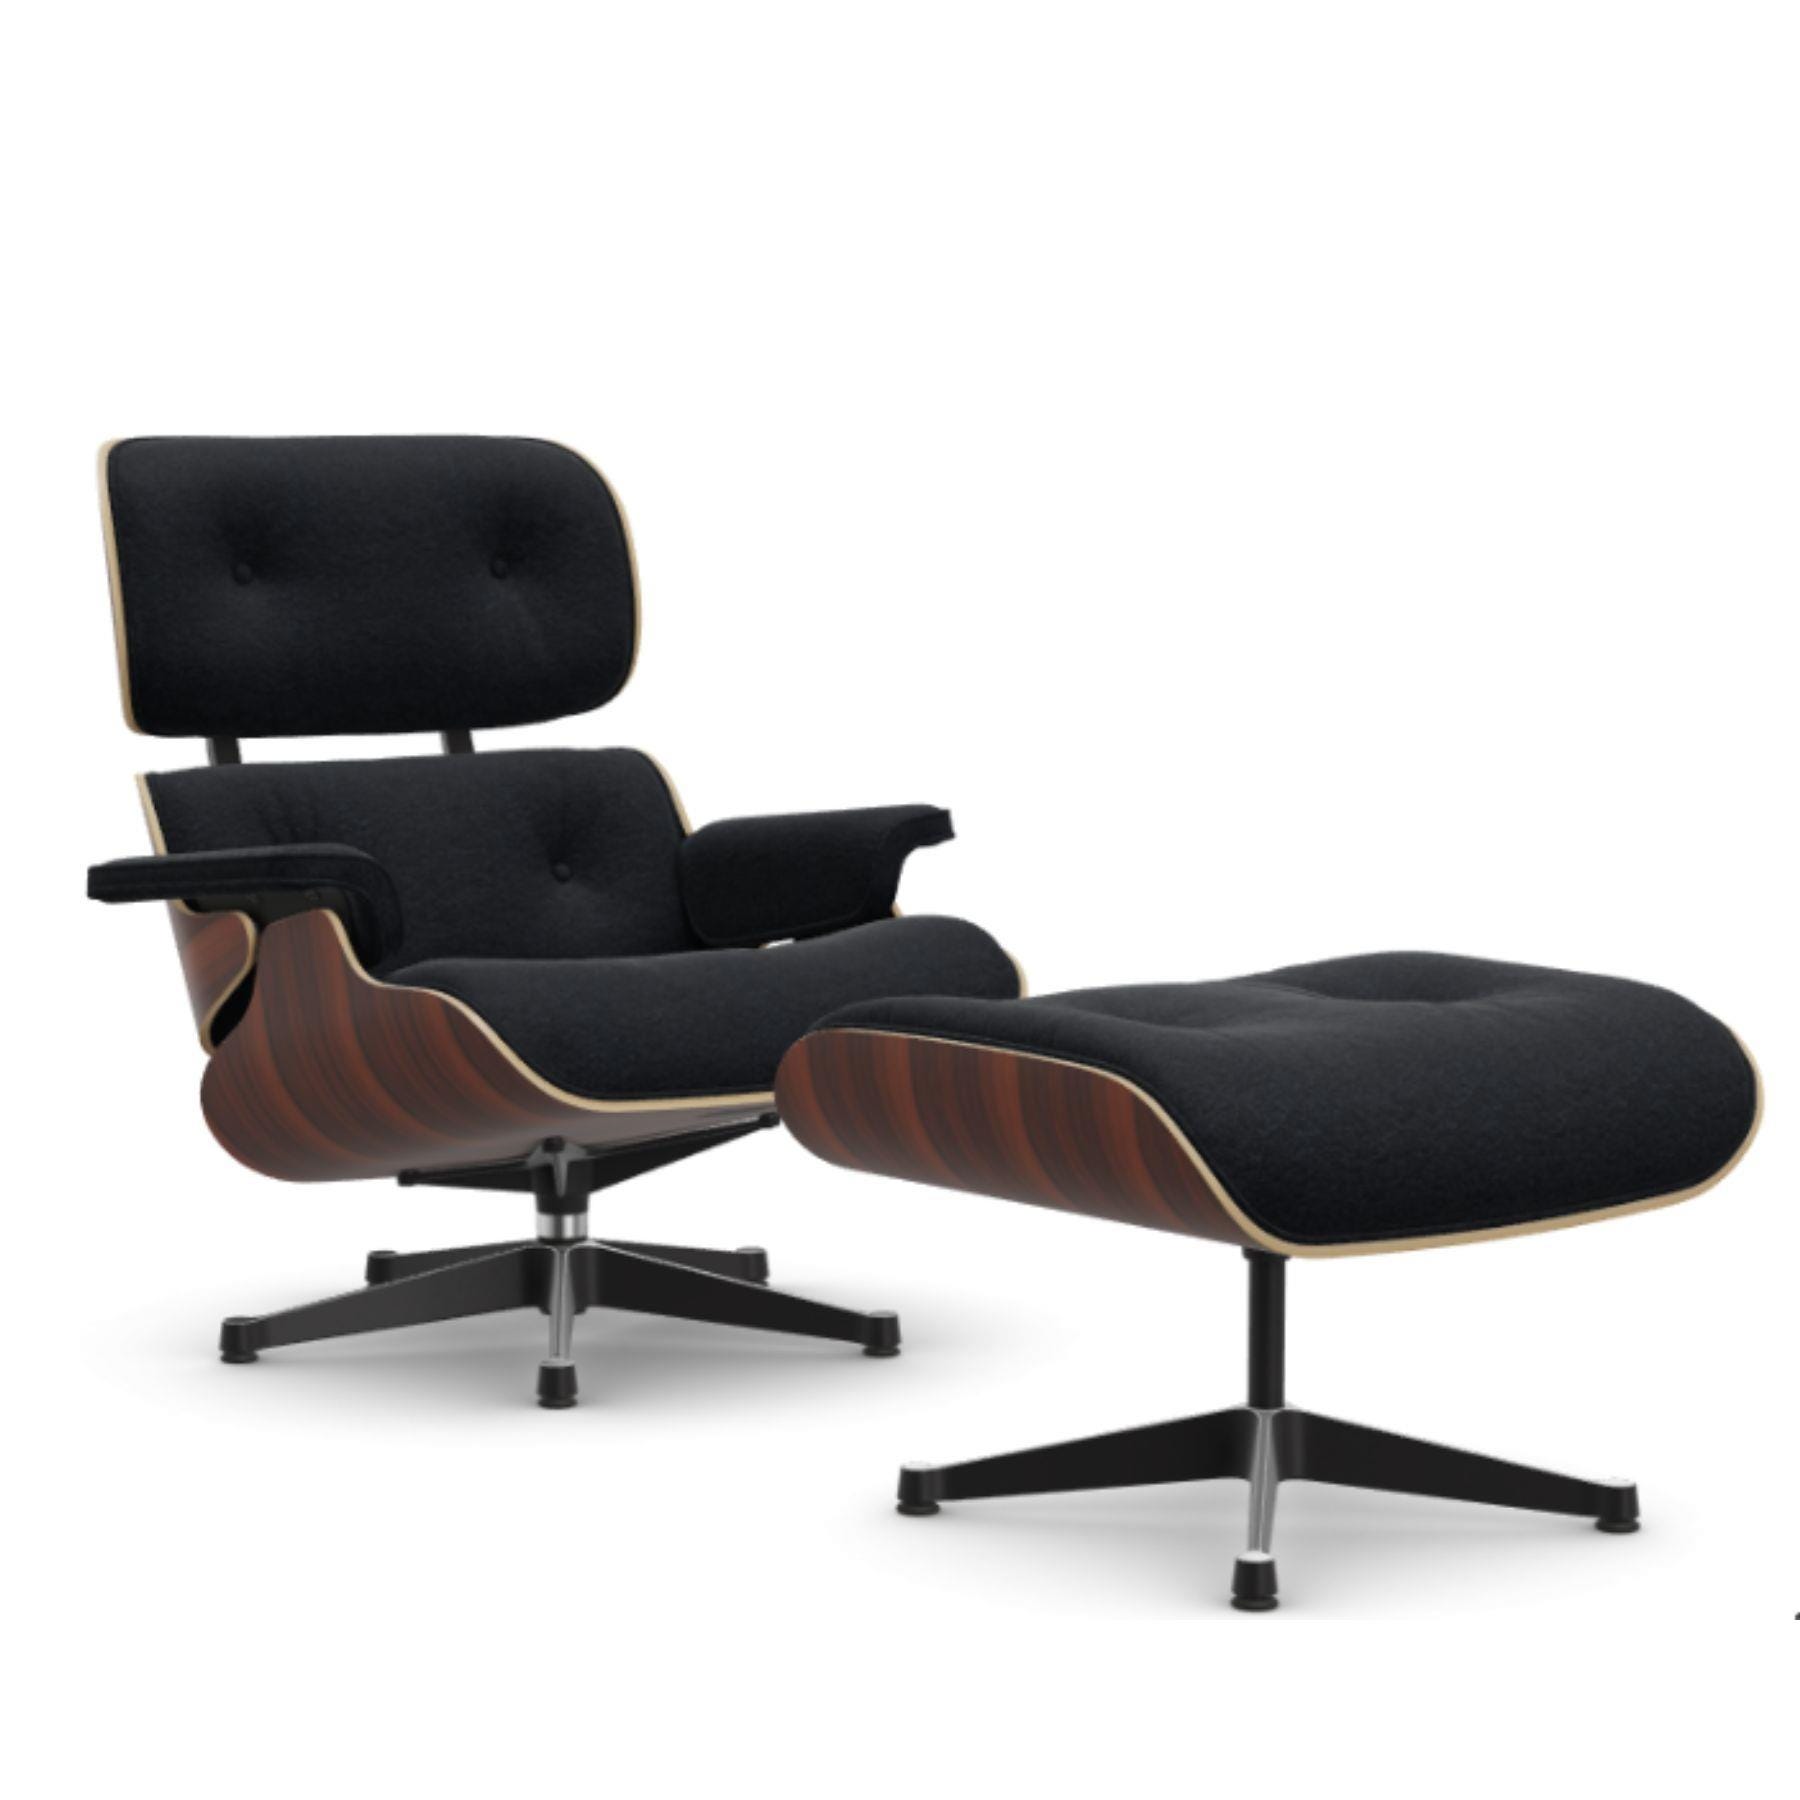 Vitra Eames Classic Lounge Chair Santos Palisander Nubia Black Anthracite Polished Black With Ottoman Light Wood Designer Furniture From Holloways